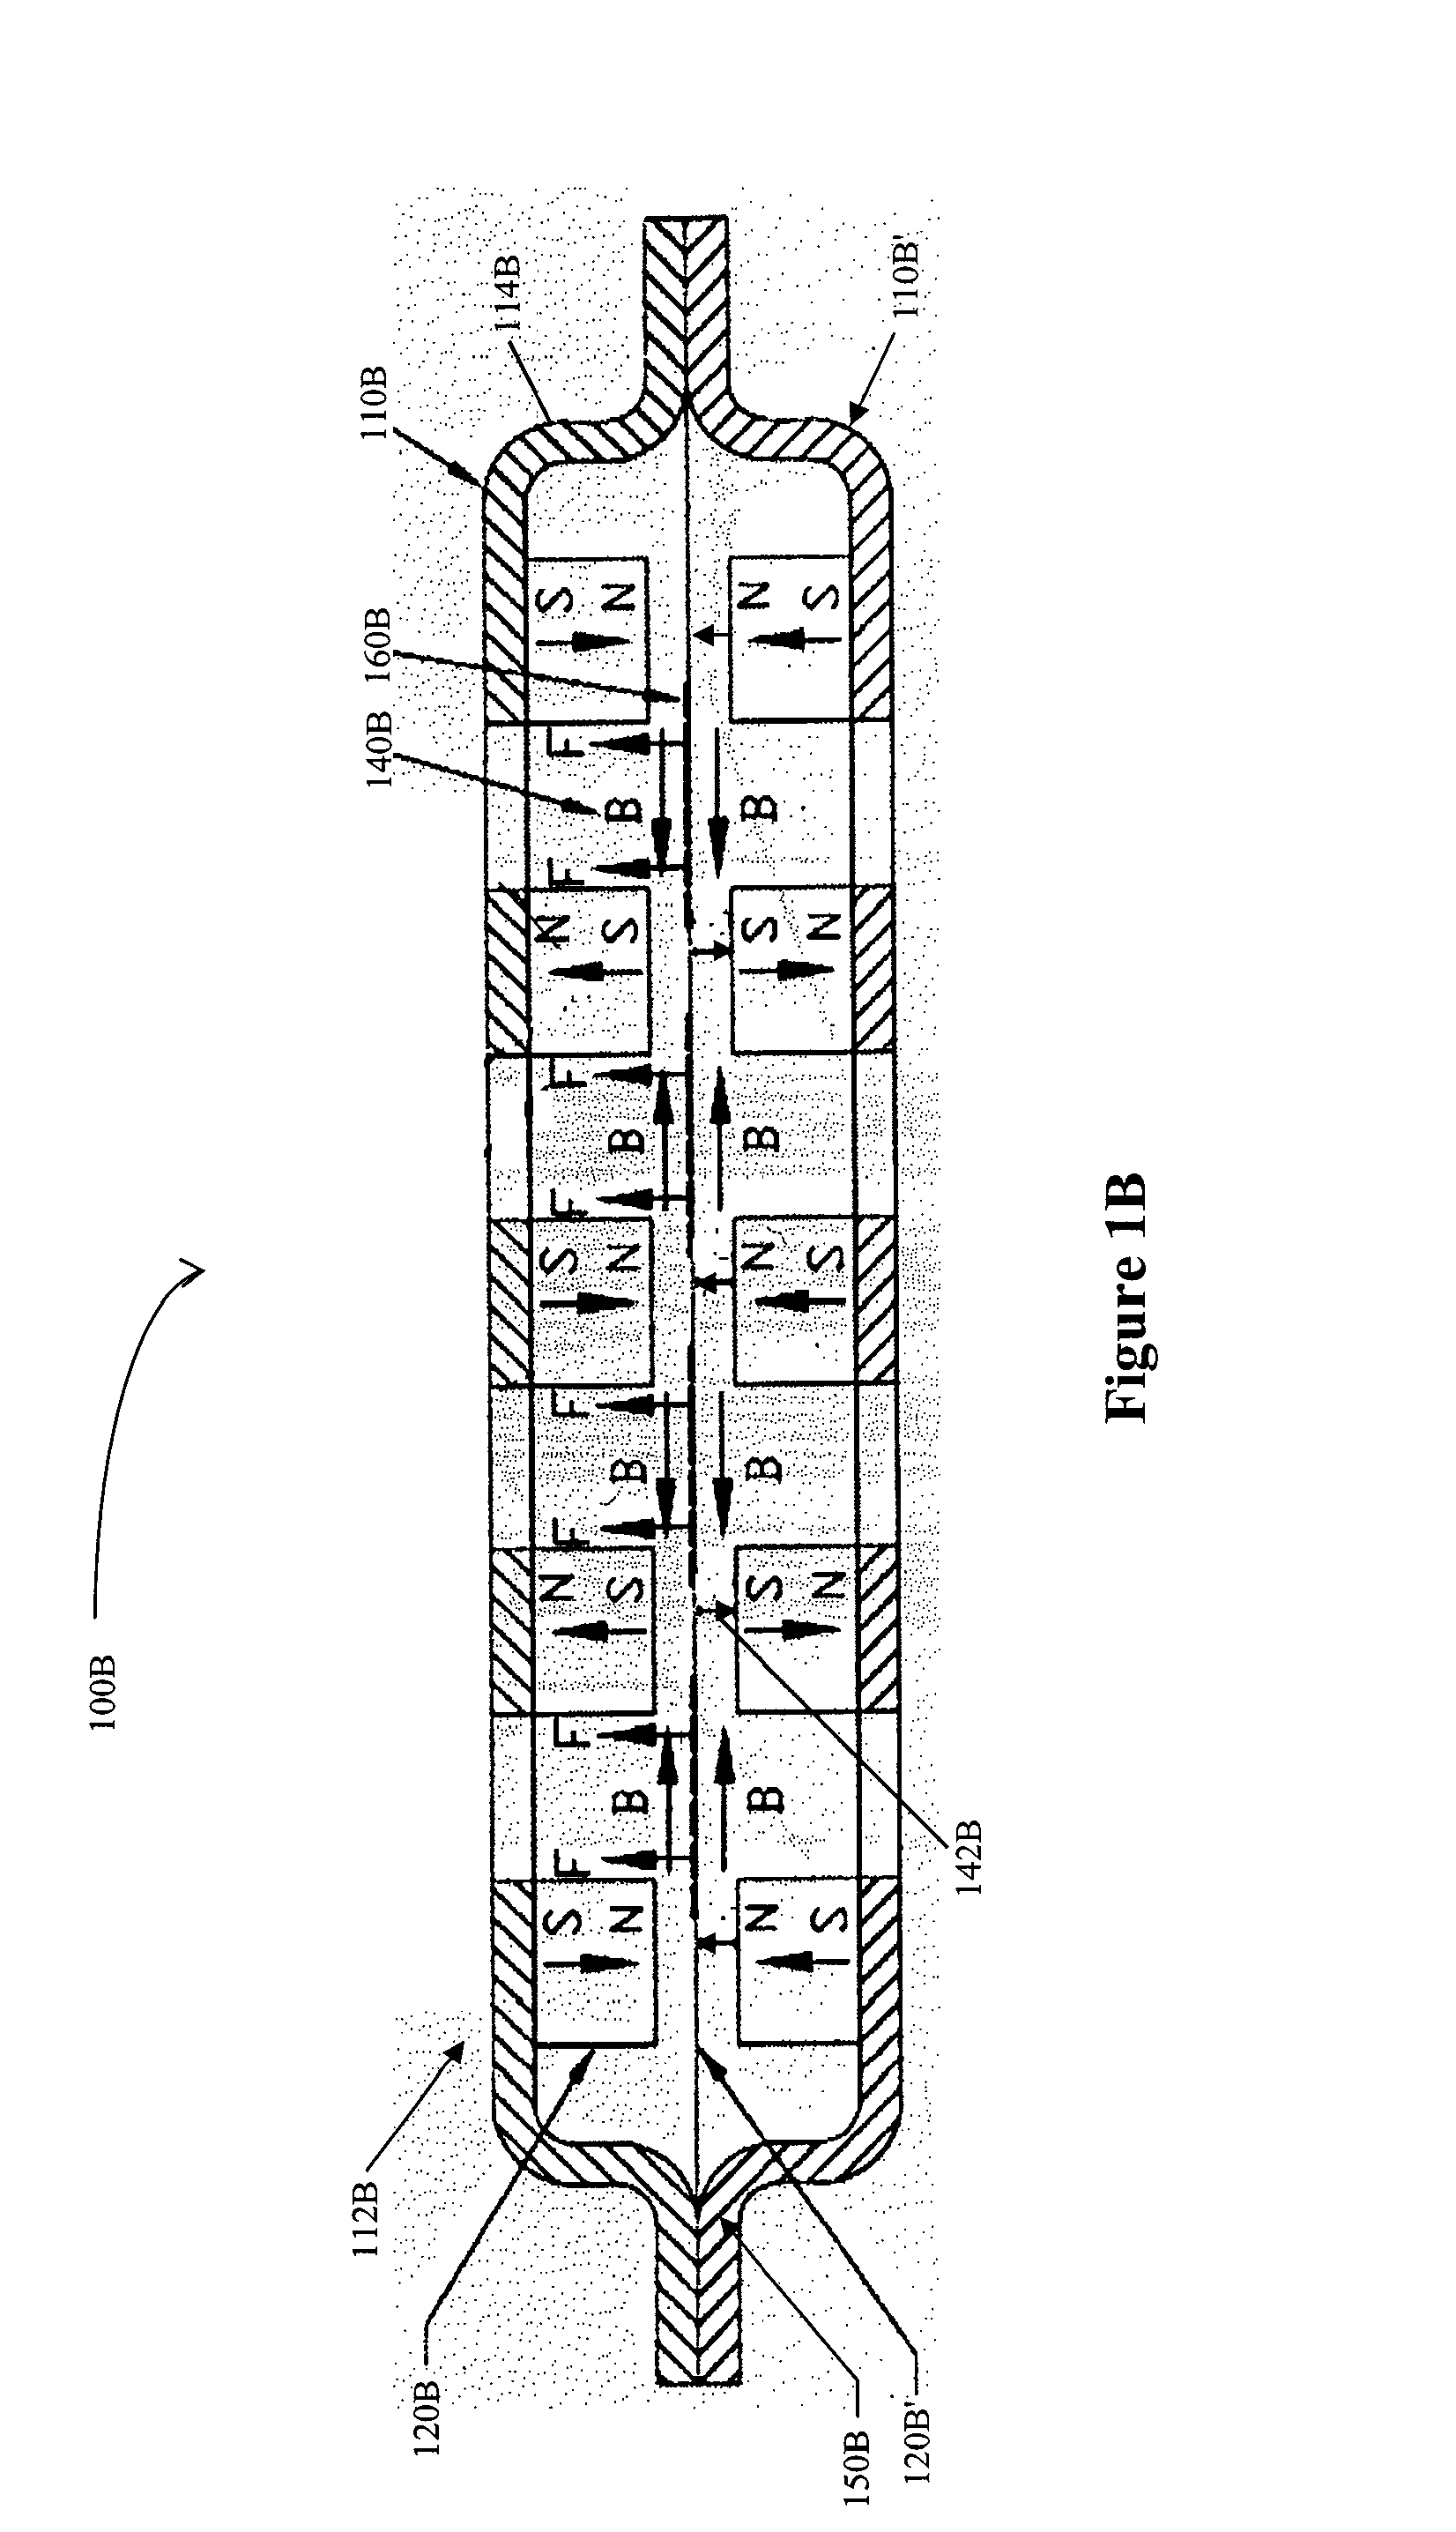 Full Range Planar Magnetic Transducers And Arrays Thereof